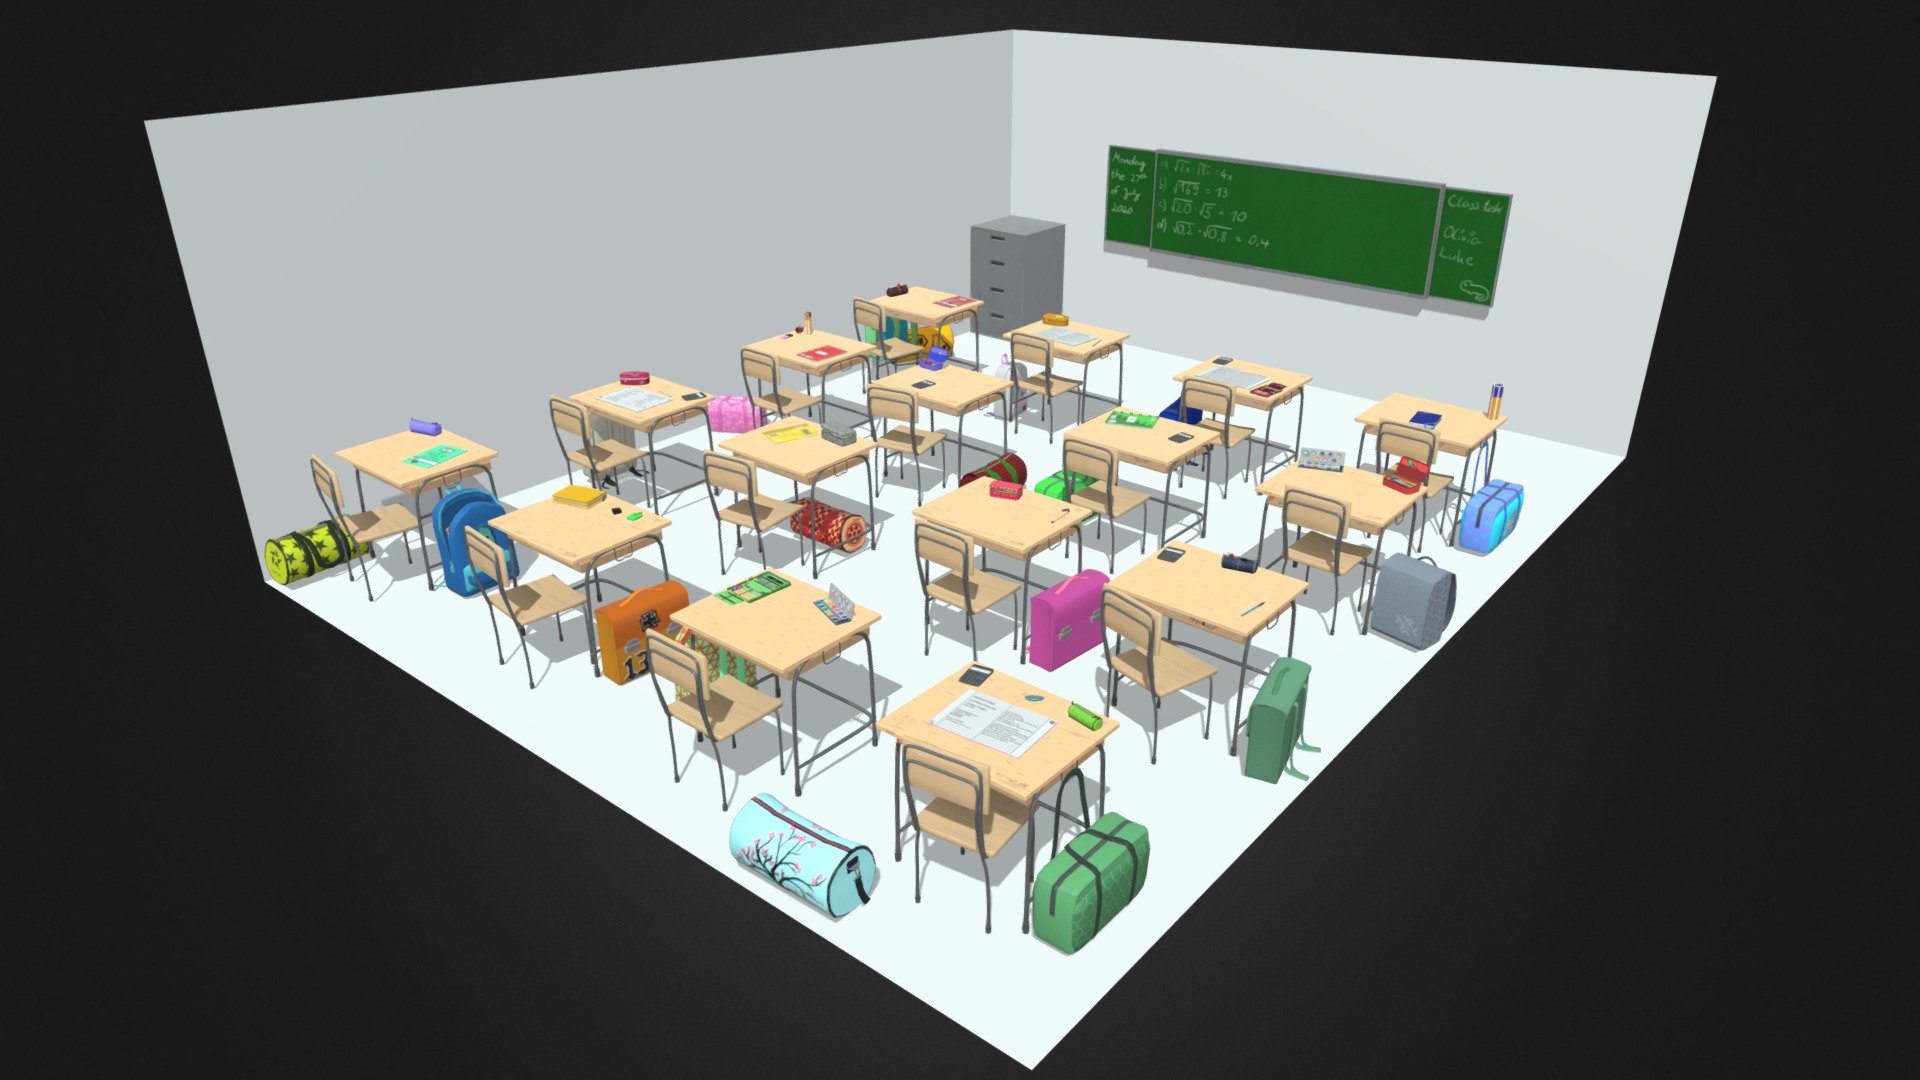 It took me 60 hours for the classroom. I wanted to try and make it look as alive as possible 3d model